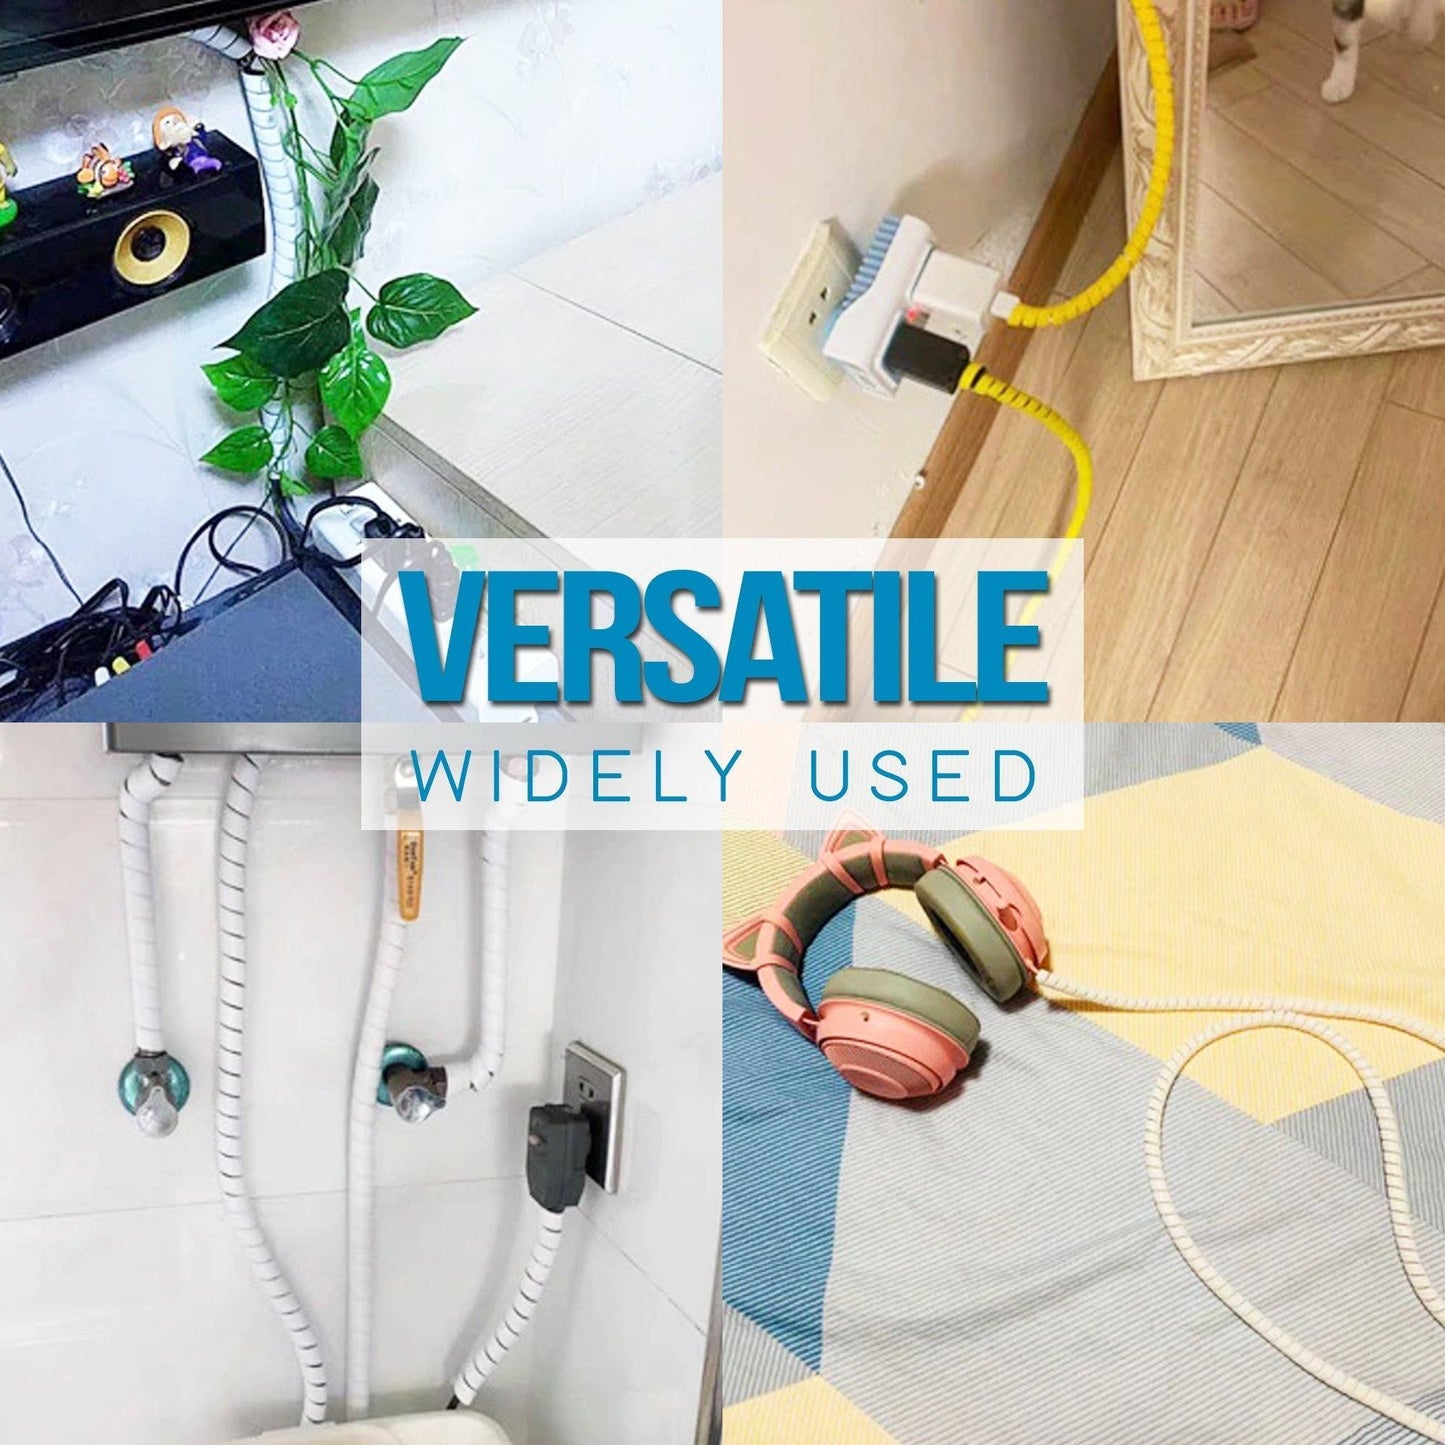 2-Meters Wire Manage Cords